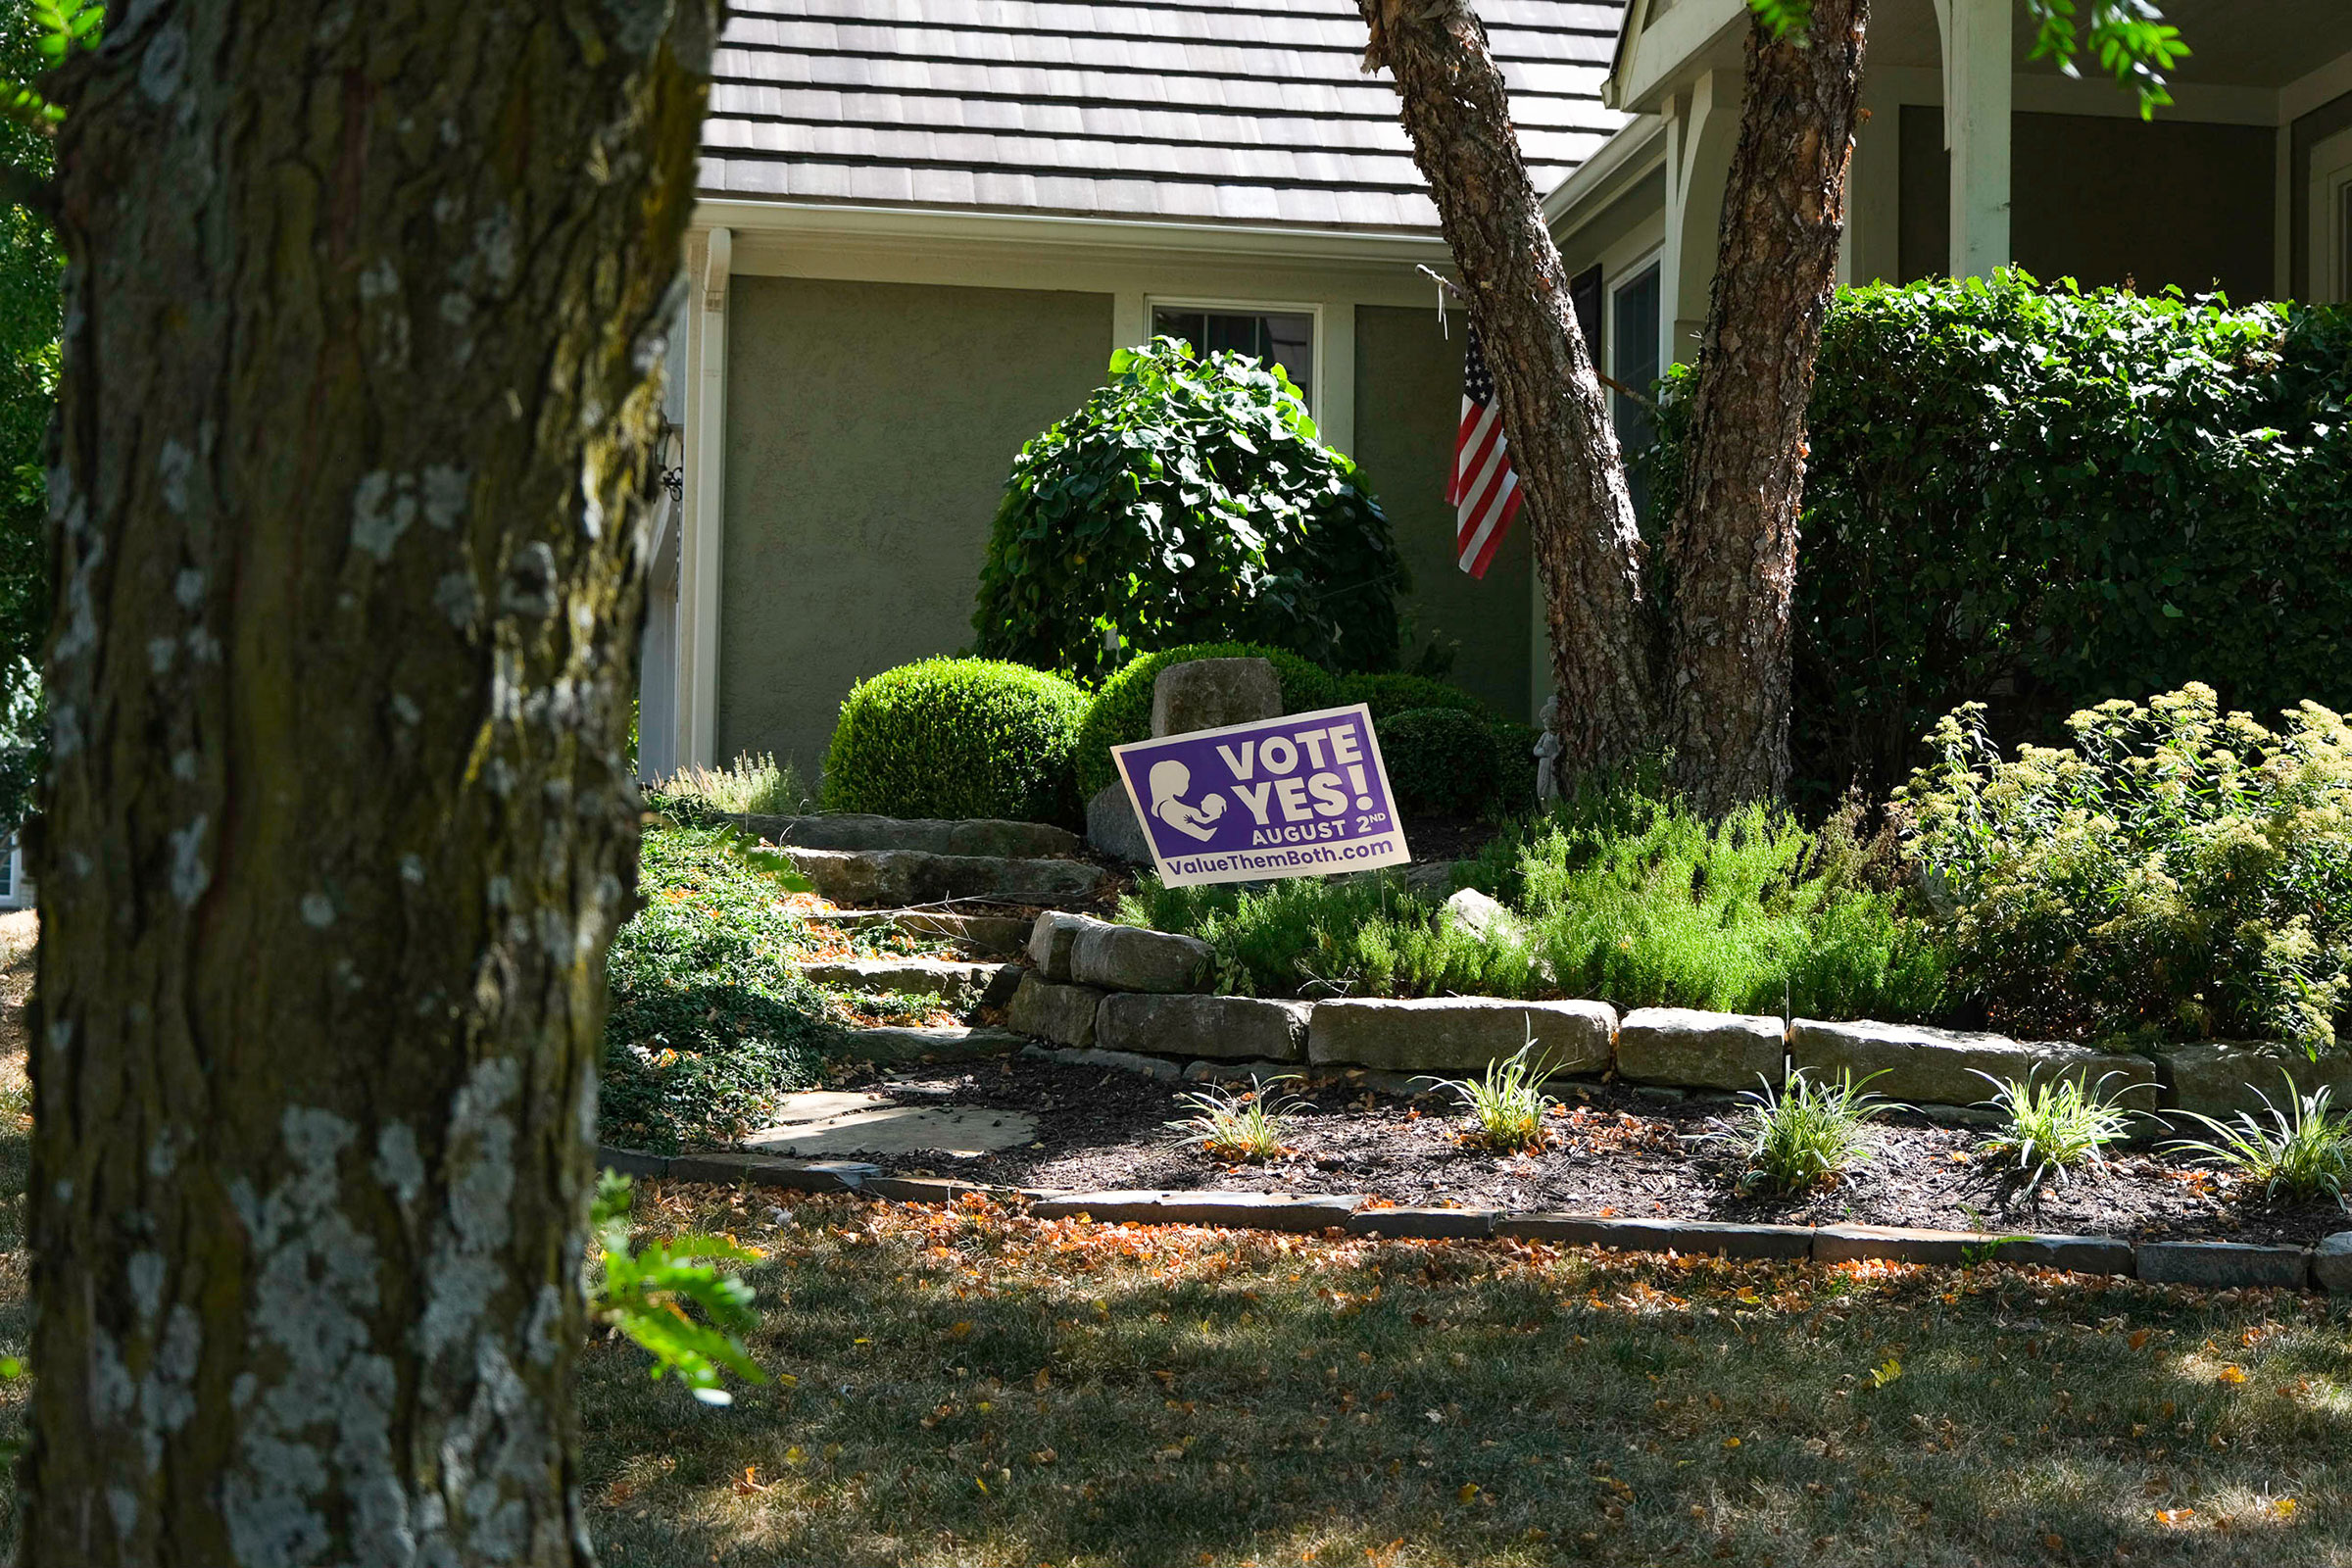 A 'Value Them Both' sign is displayed in the yard of a home in Olathe. (Arin Yoon for TIME)